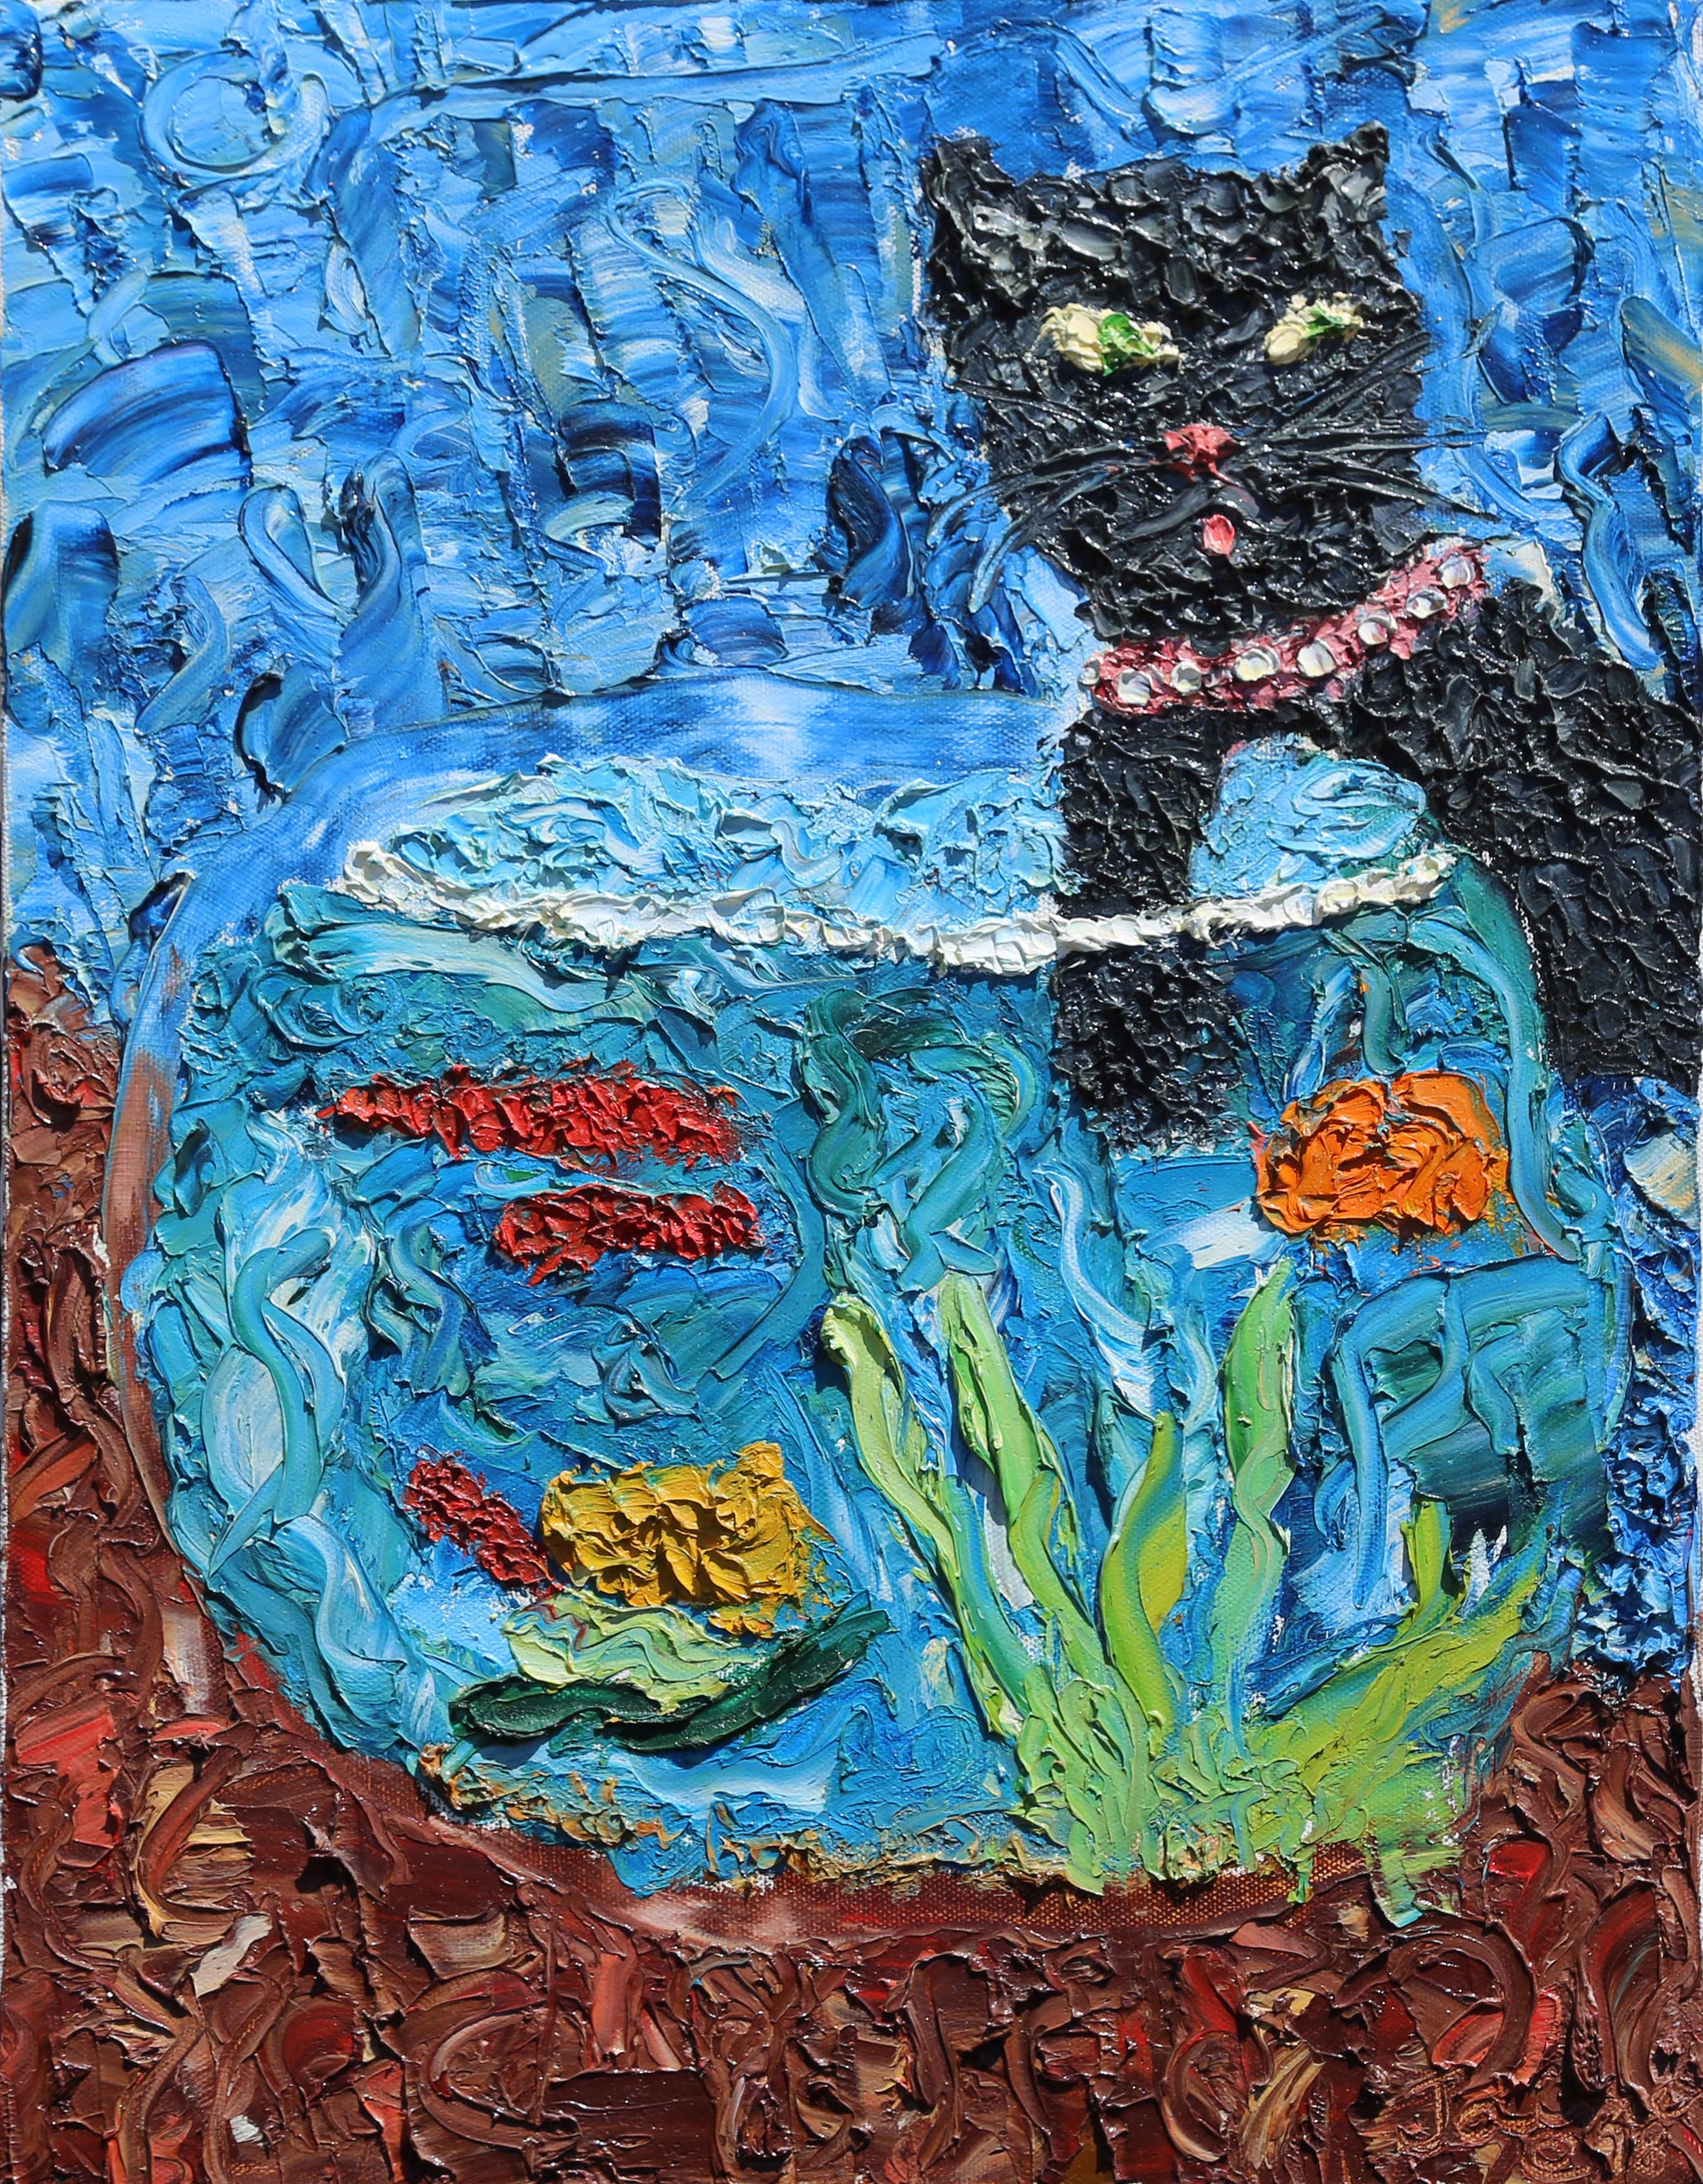 Cat in the Bowl by Jaime Miller